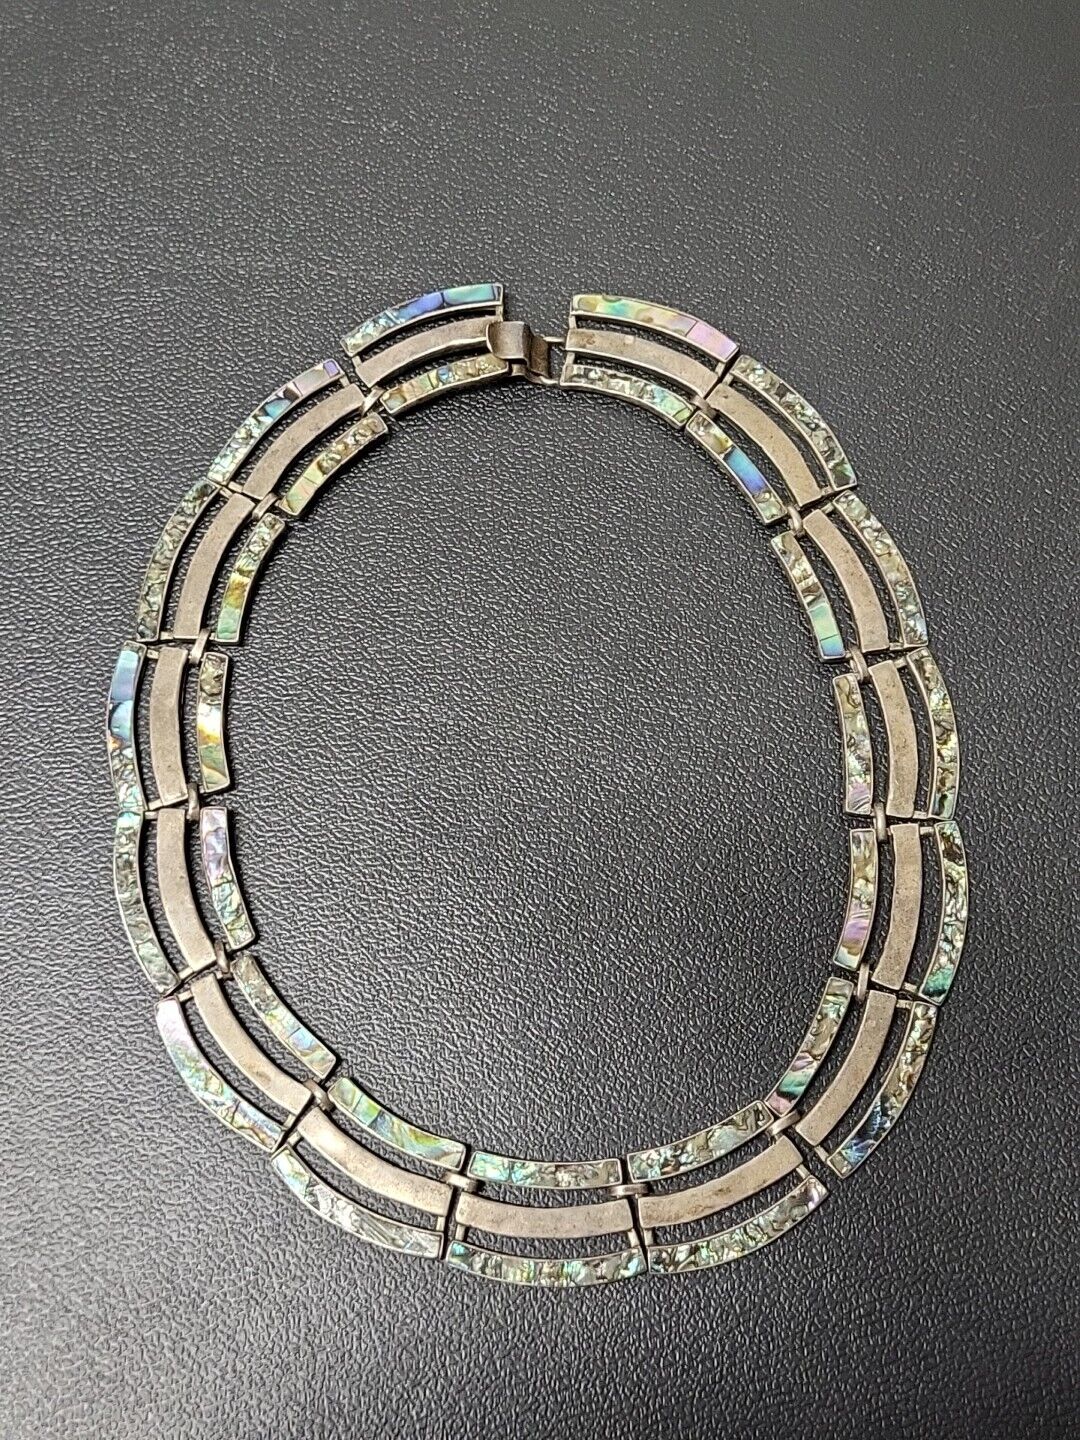 Vintage Taxco Mexico Inlaid Abalone Shell Sterling Silver Choker Necklace